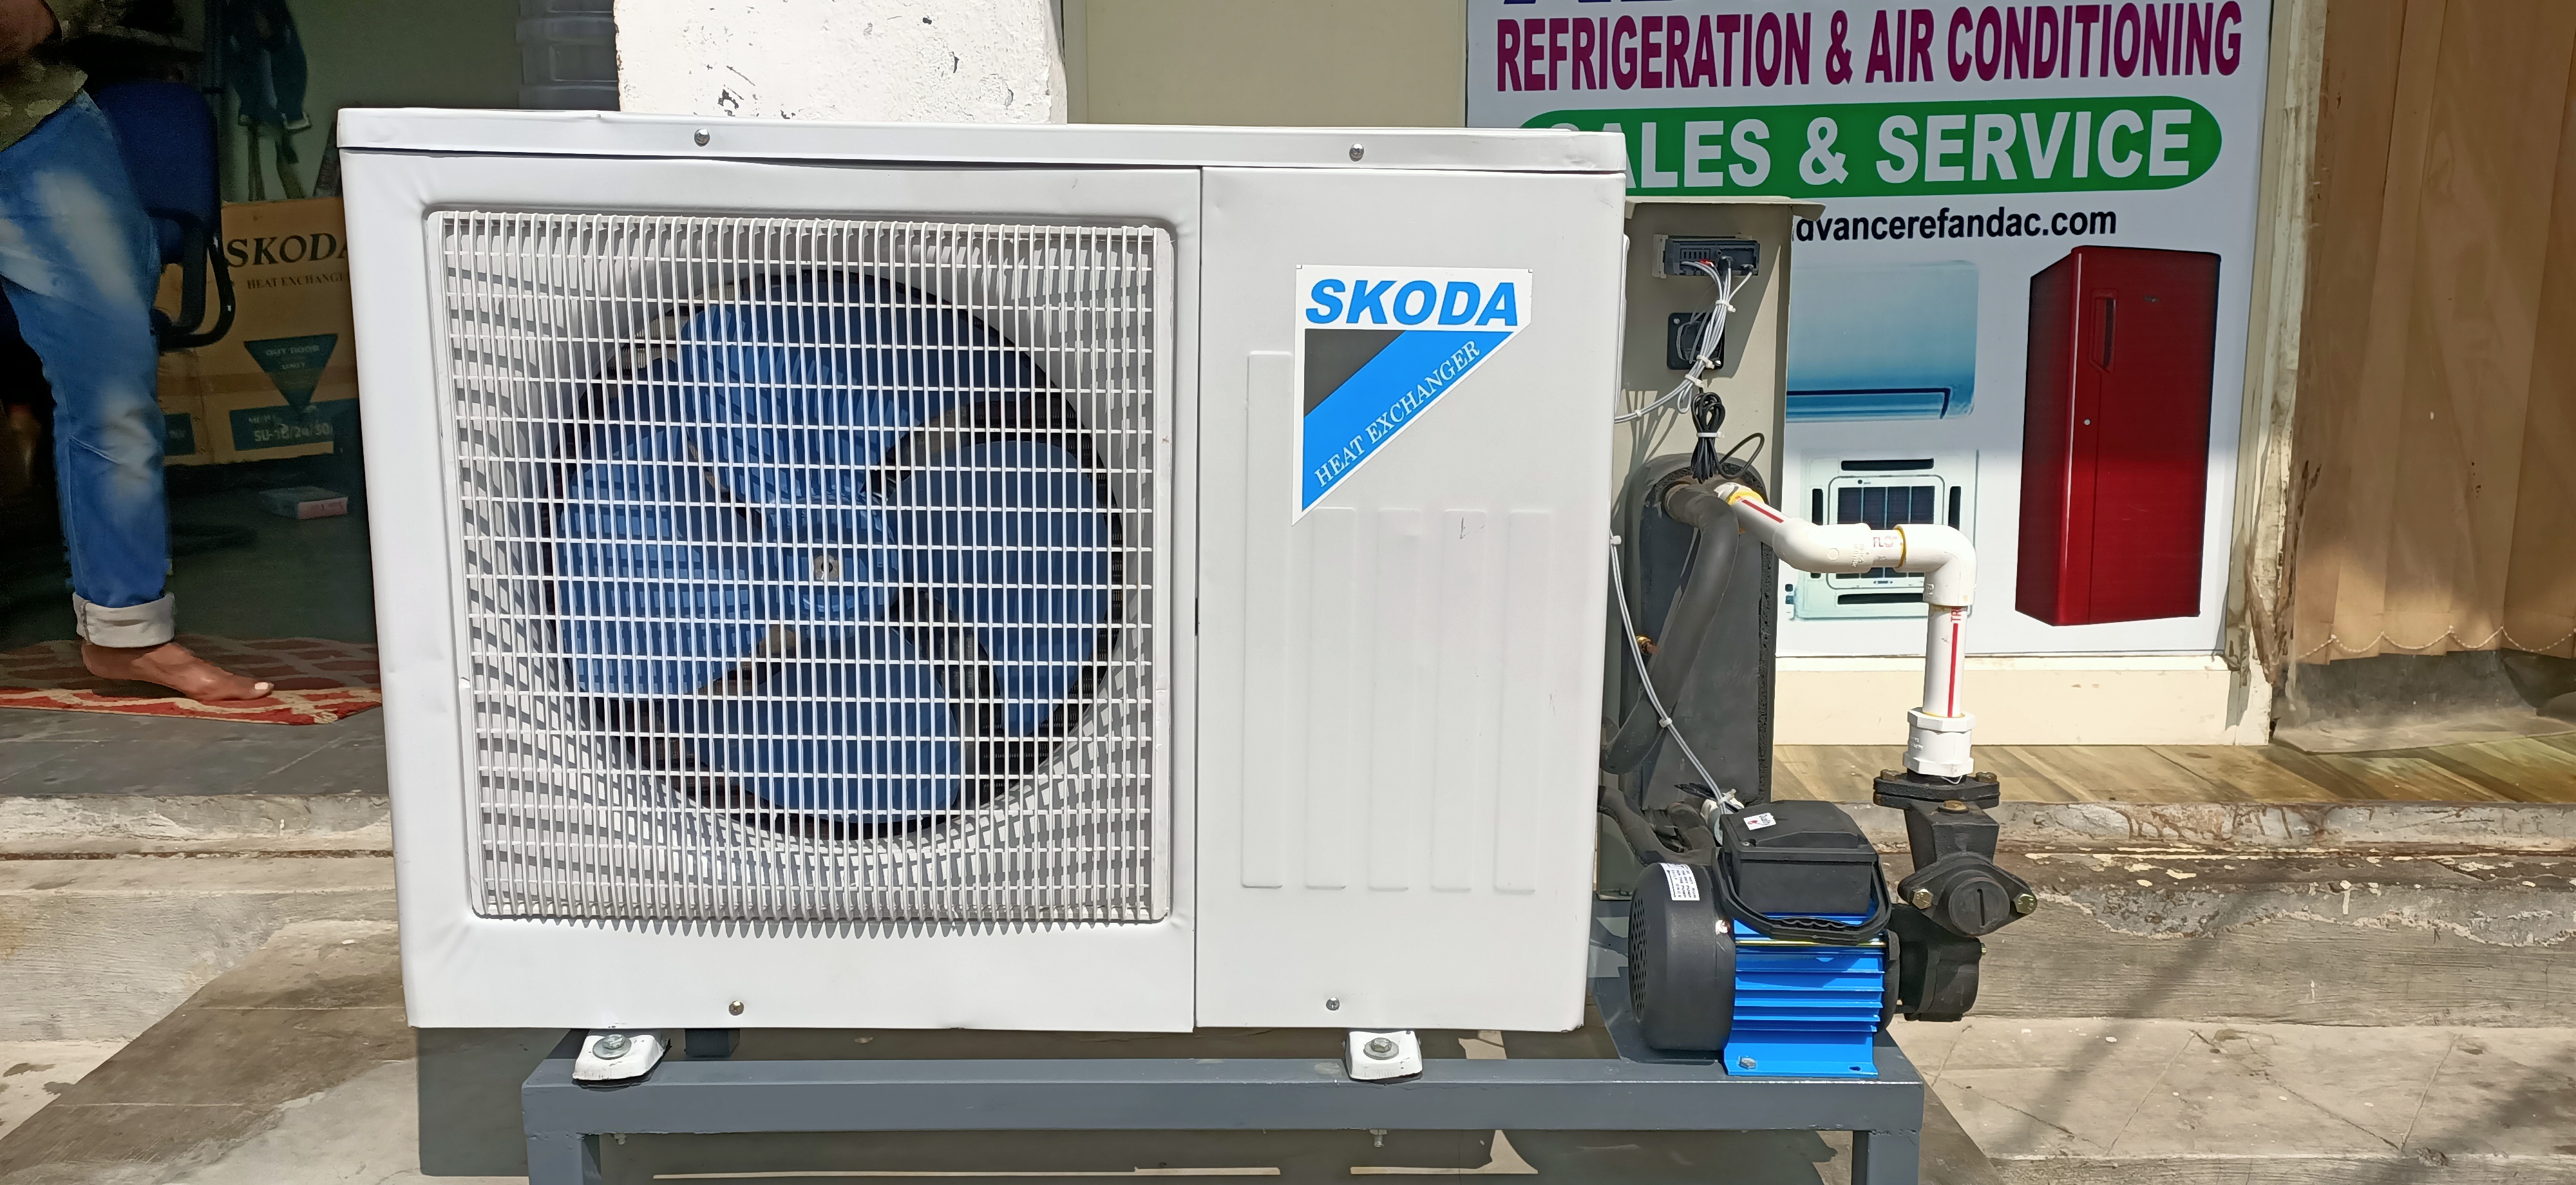 Advance Refrigeration & Air Conditioning, Chiller for water plant, RO Online Chiller 